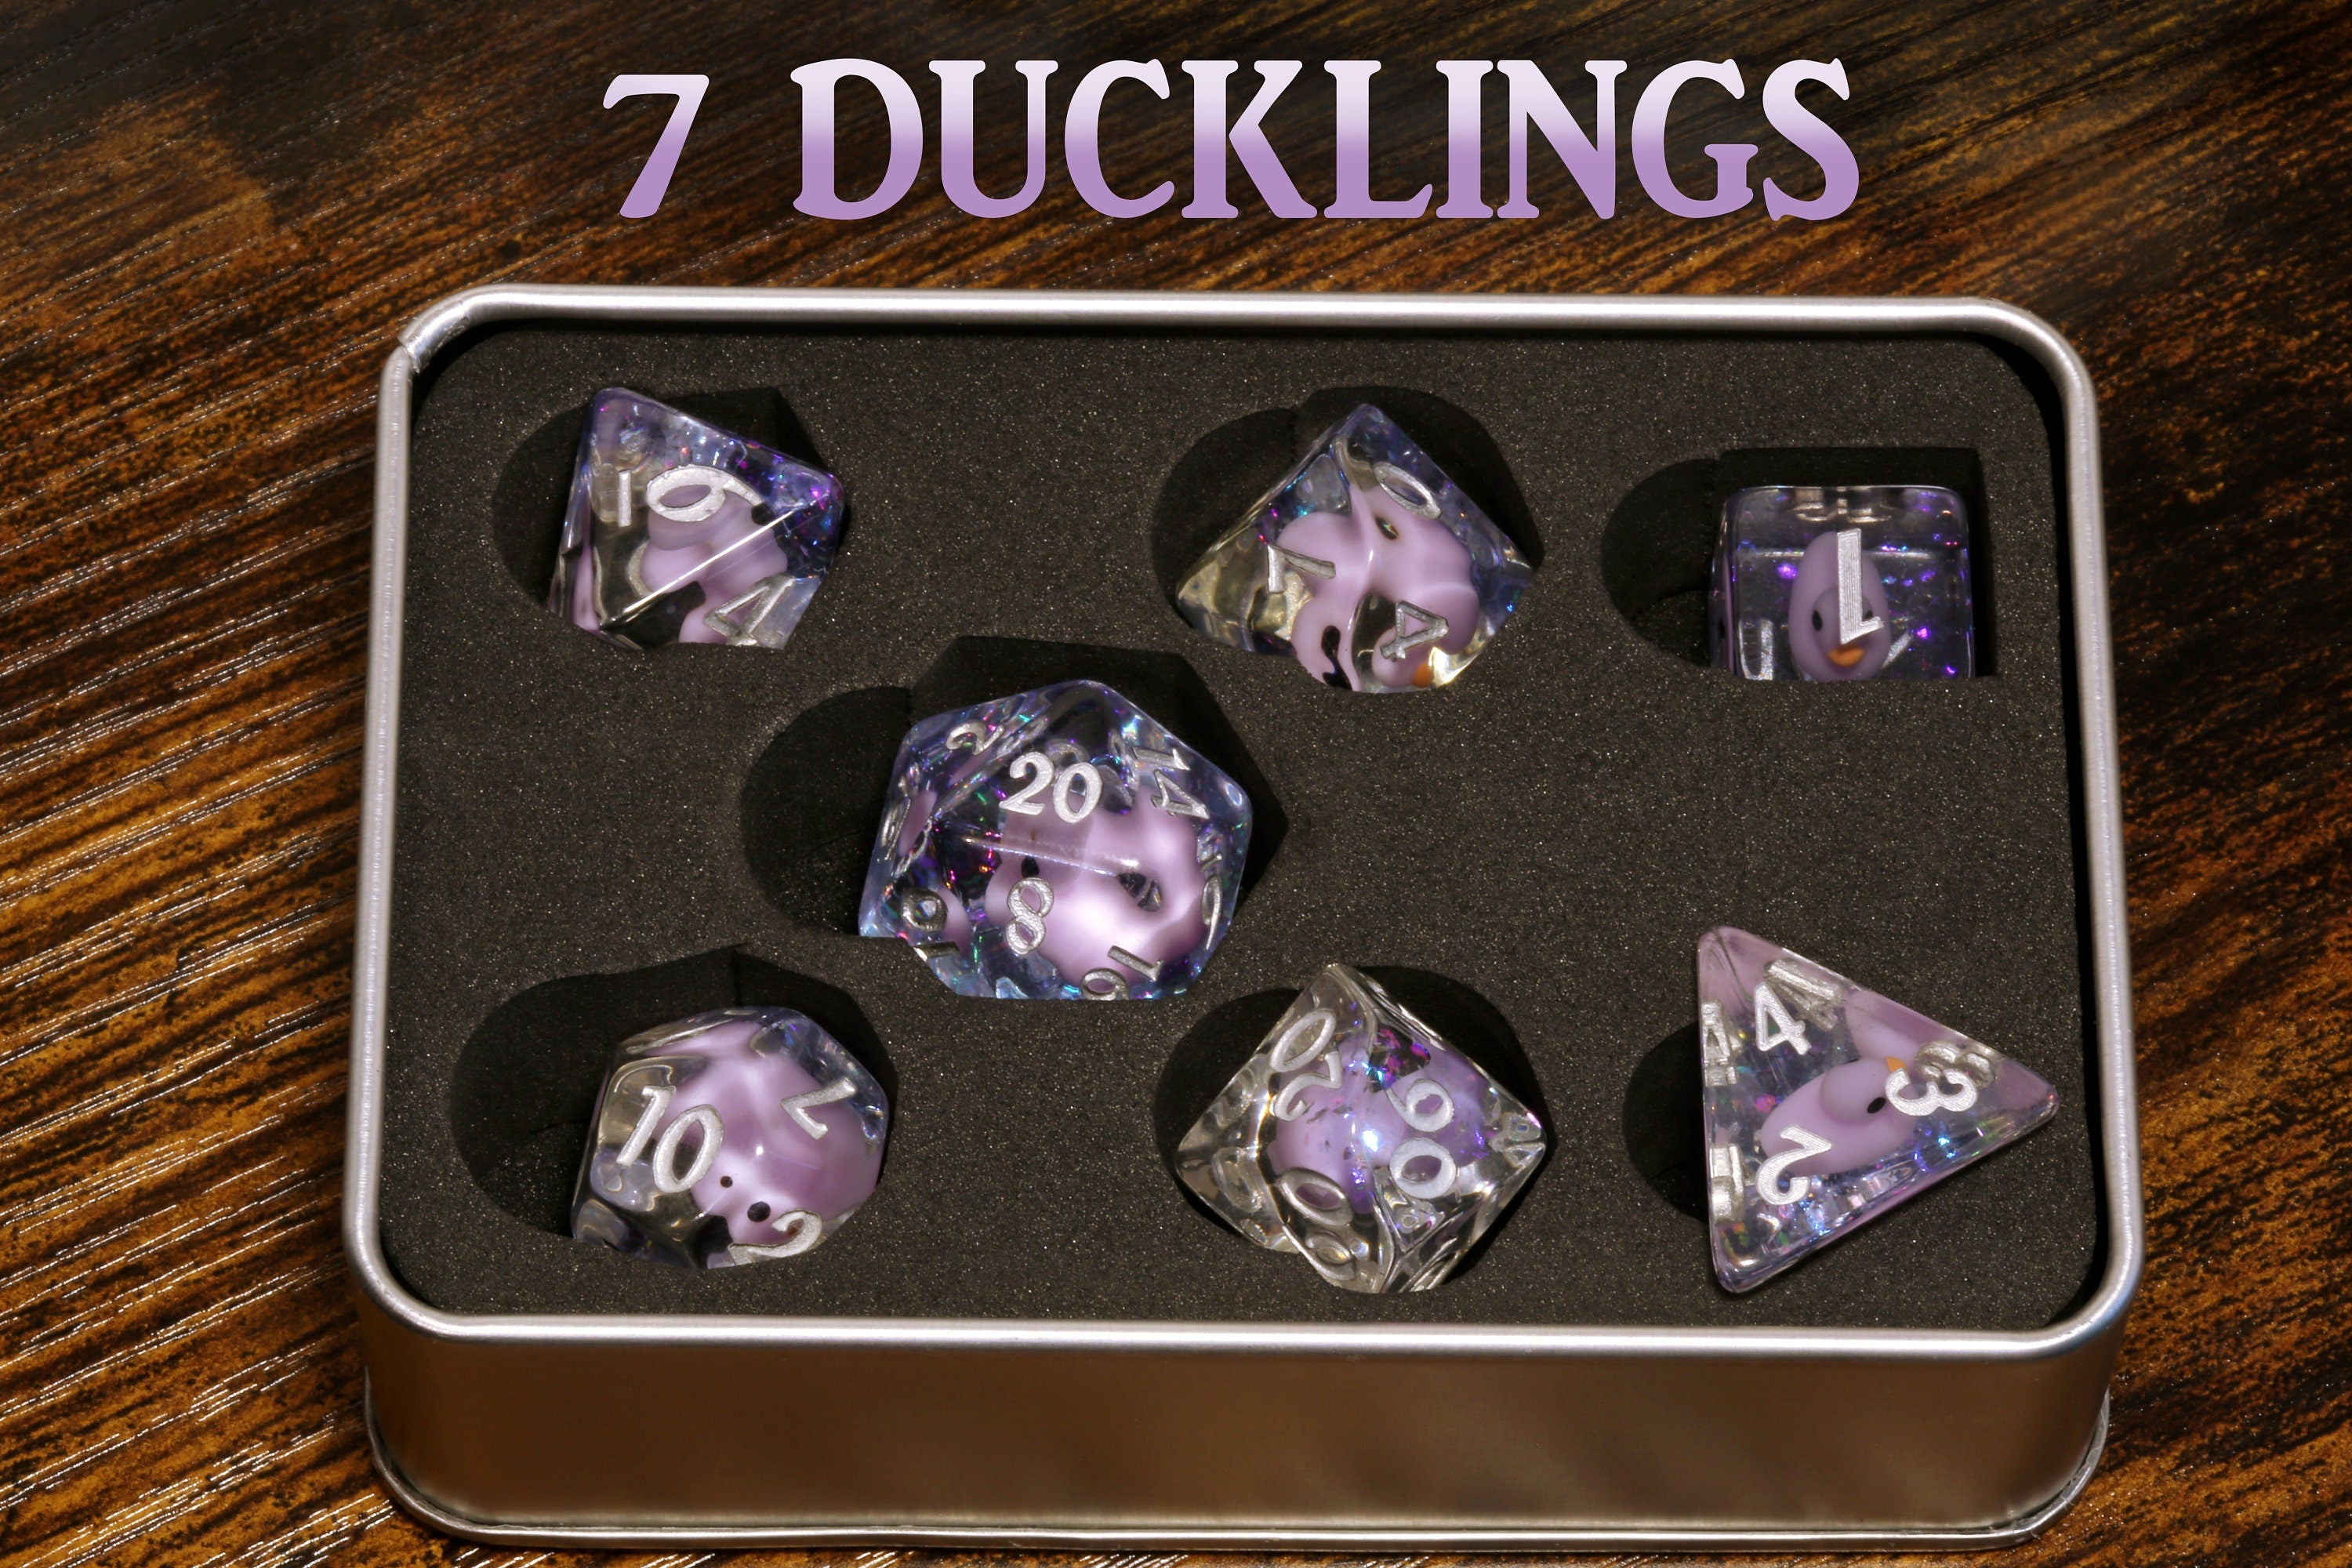 Behold !!! The Ducklings of Doom box and dice set